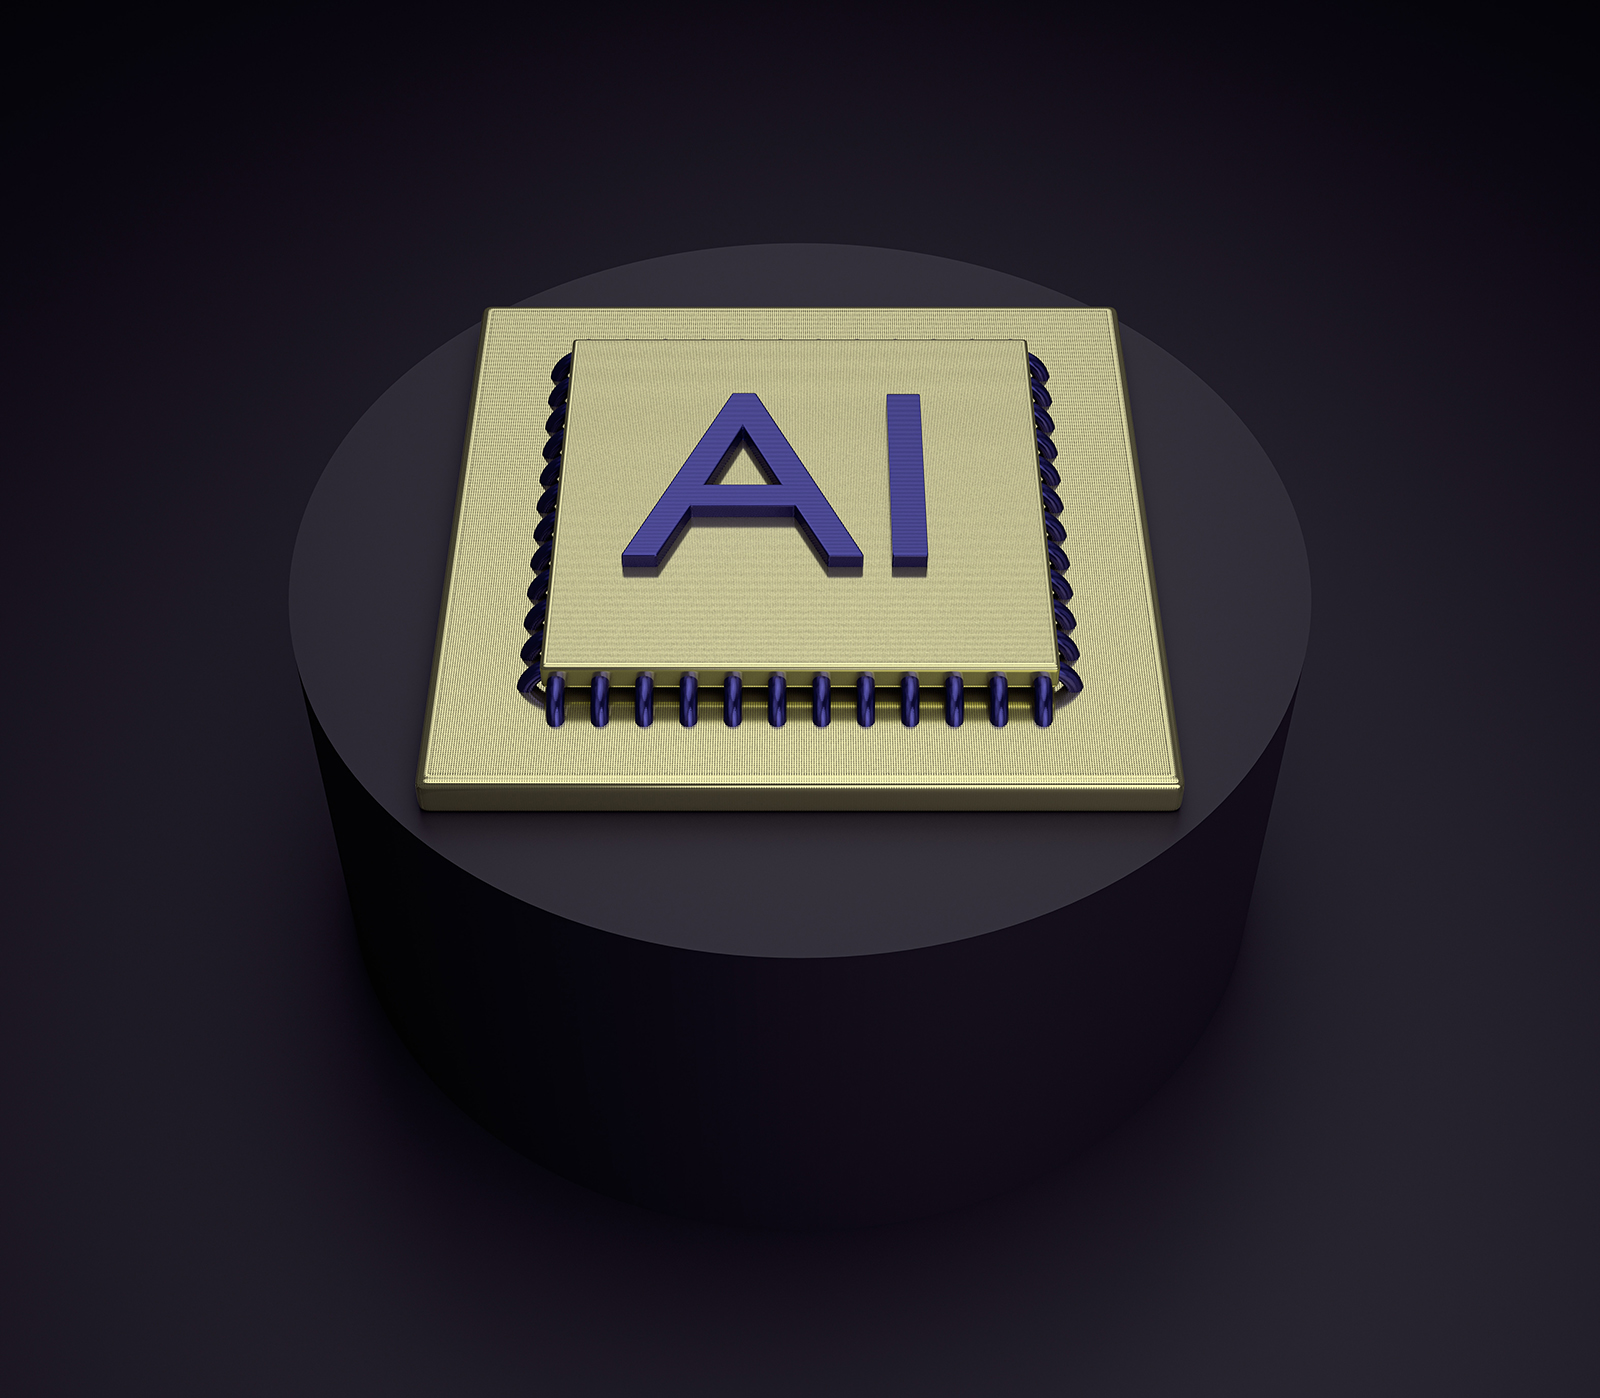 A computer chip with "AI" written on it.